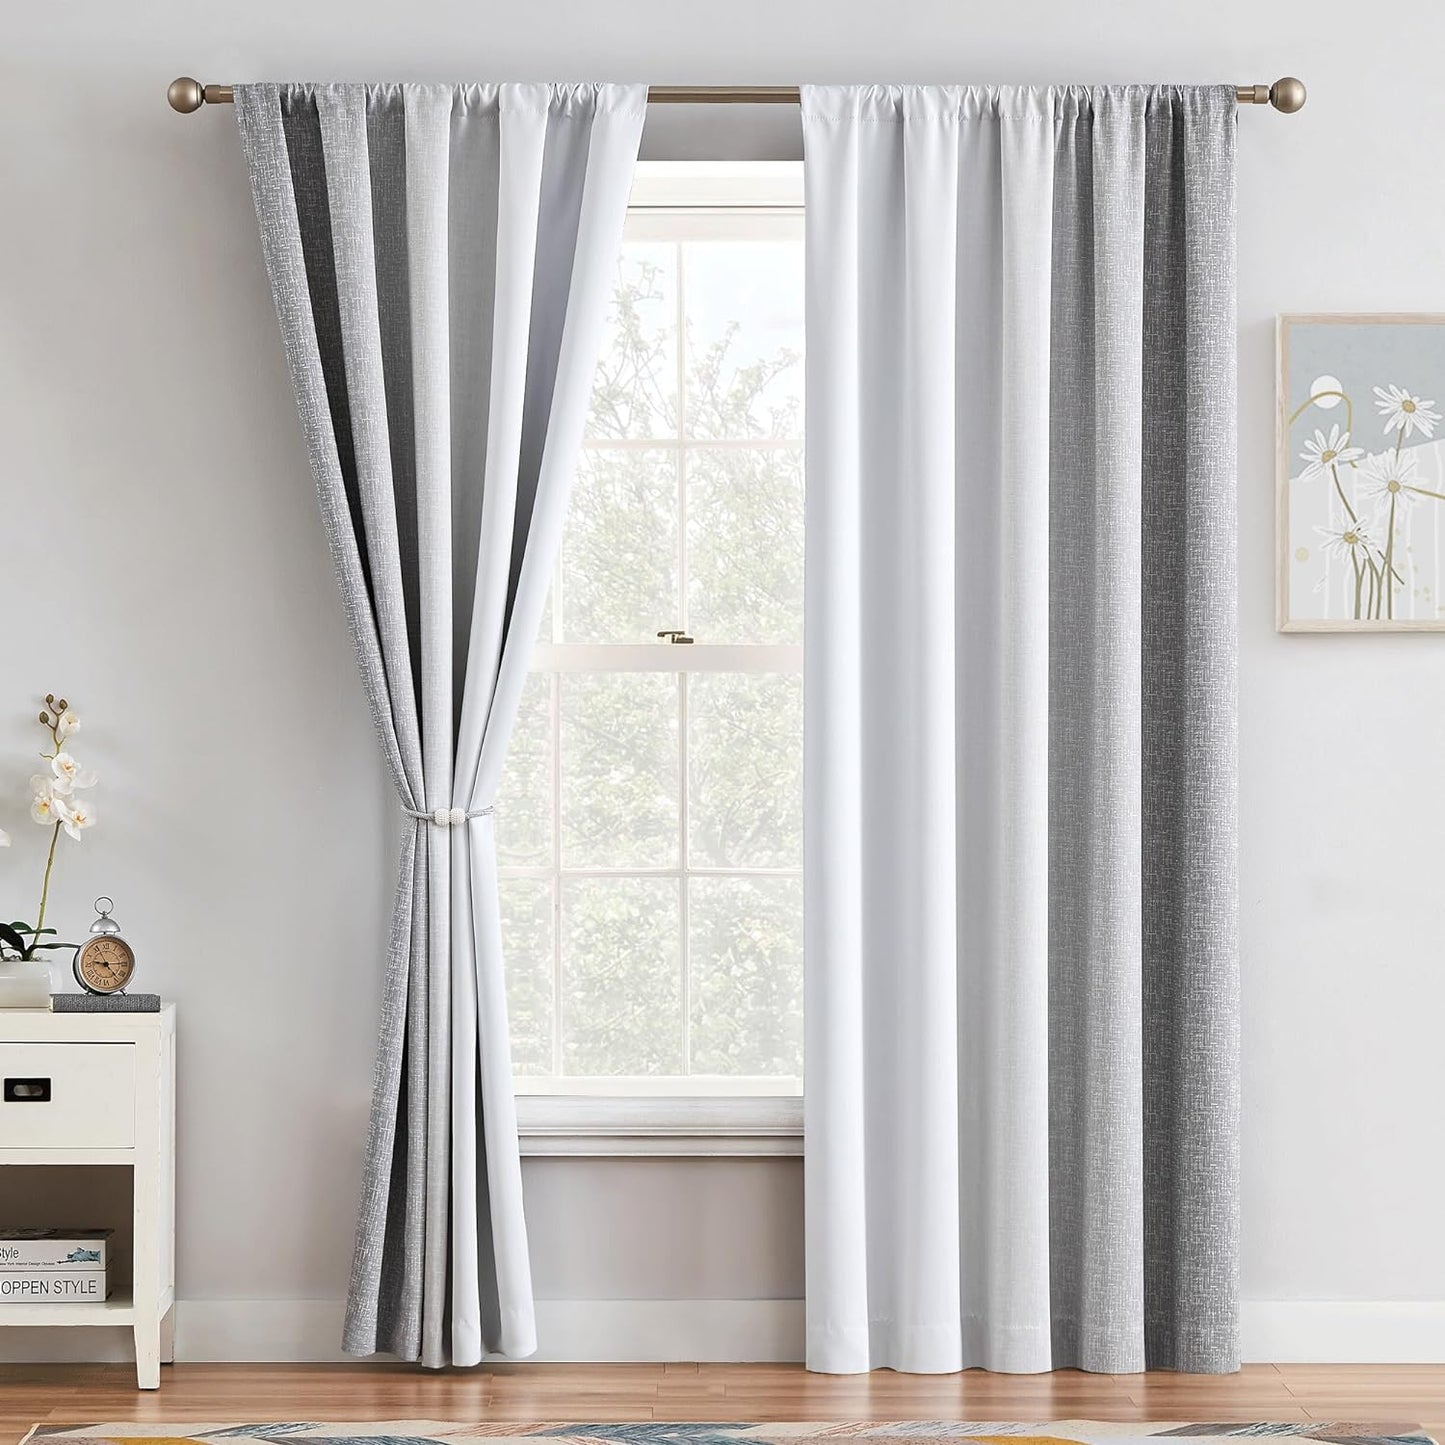 Geomoroccan Ombre 100% Blackout Curtains 84 Inches Long, Pink and White 2 Tone Reversible Window Treatments for Bedroom Living Room, Linen Gradient Print Rod Pocket Drapes 52" W 2 Panel Sets  Geomoroccan Grey 52"X95"X2 